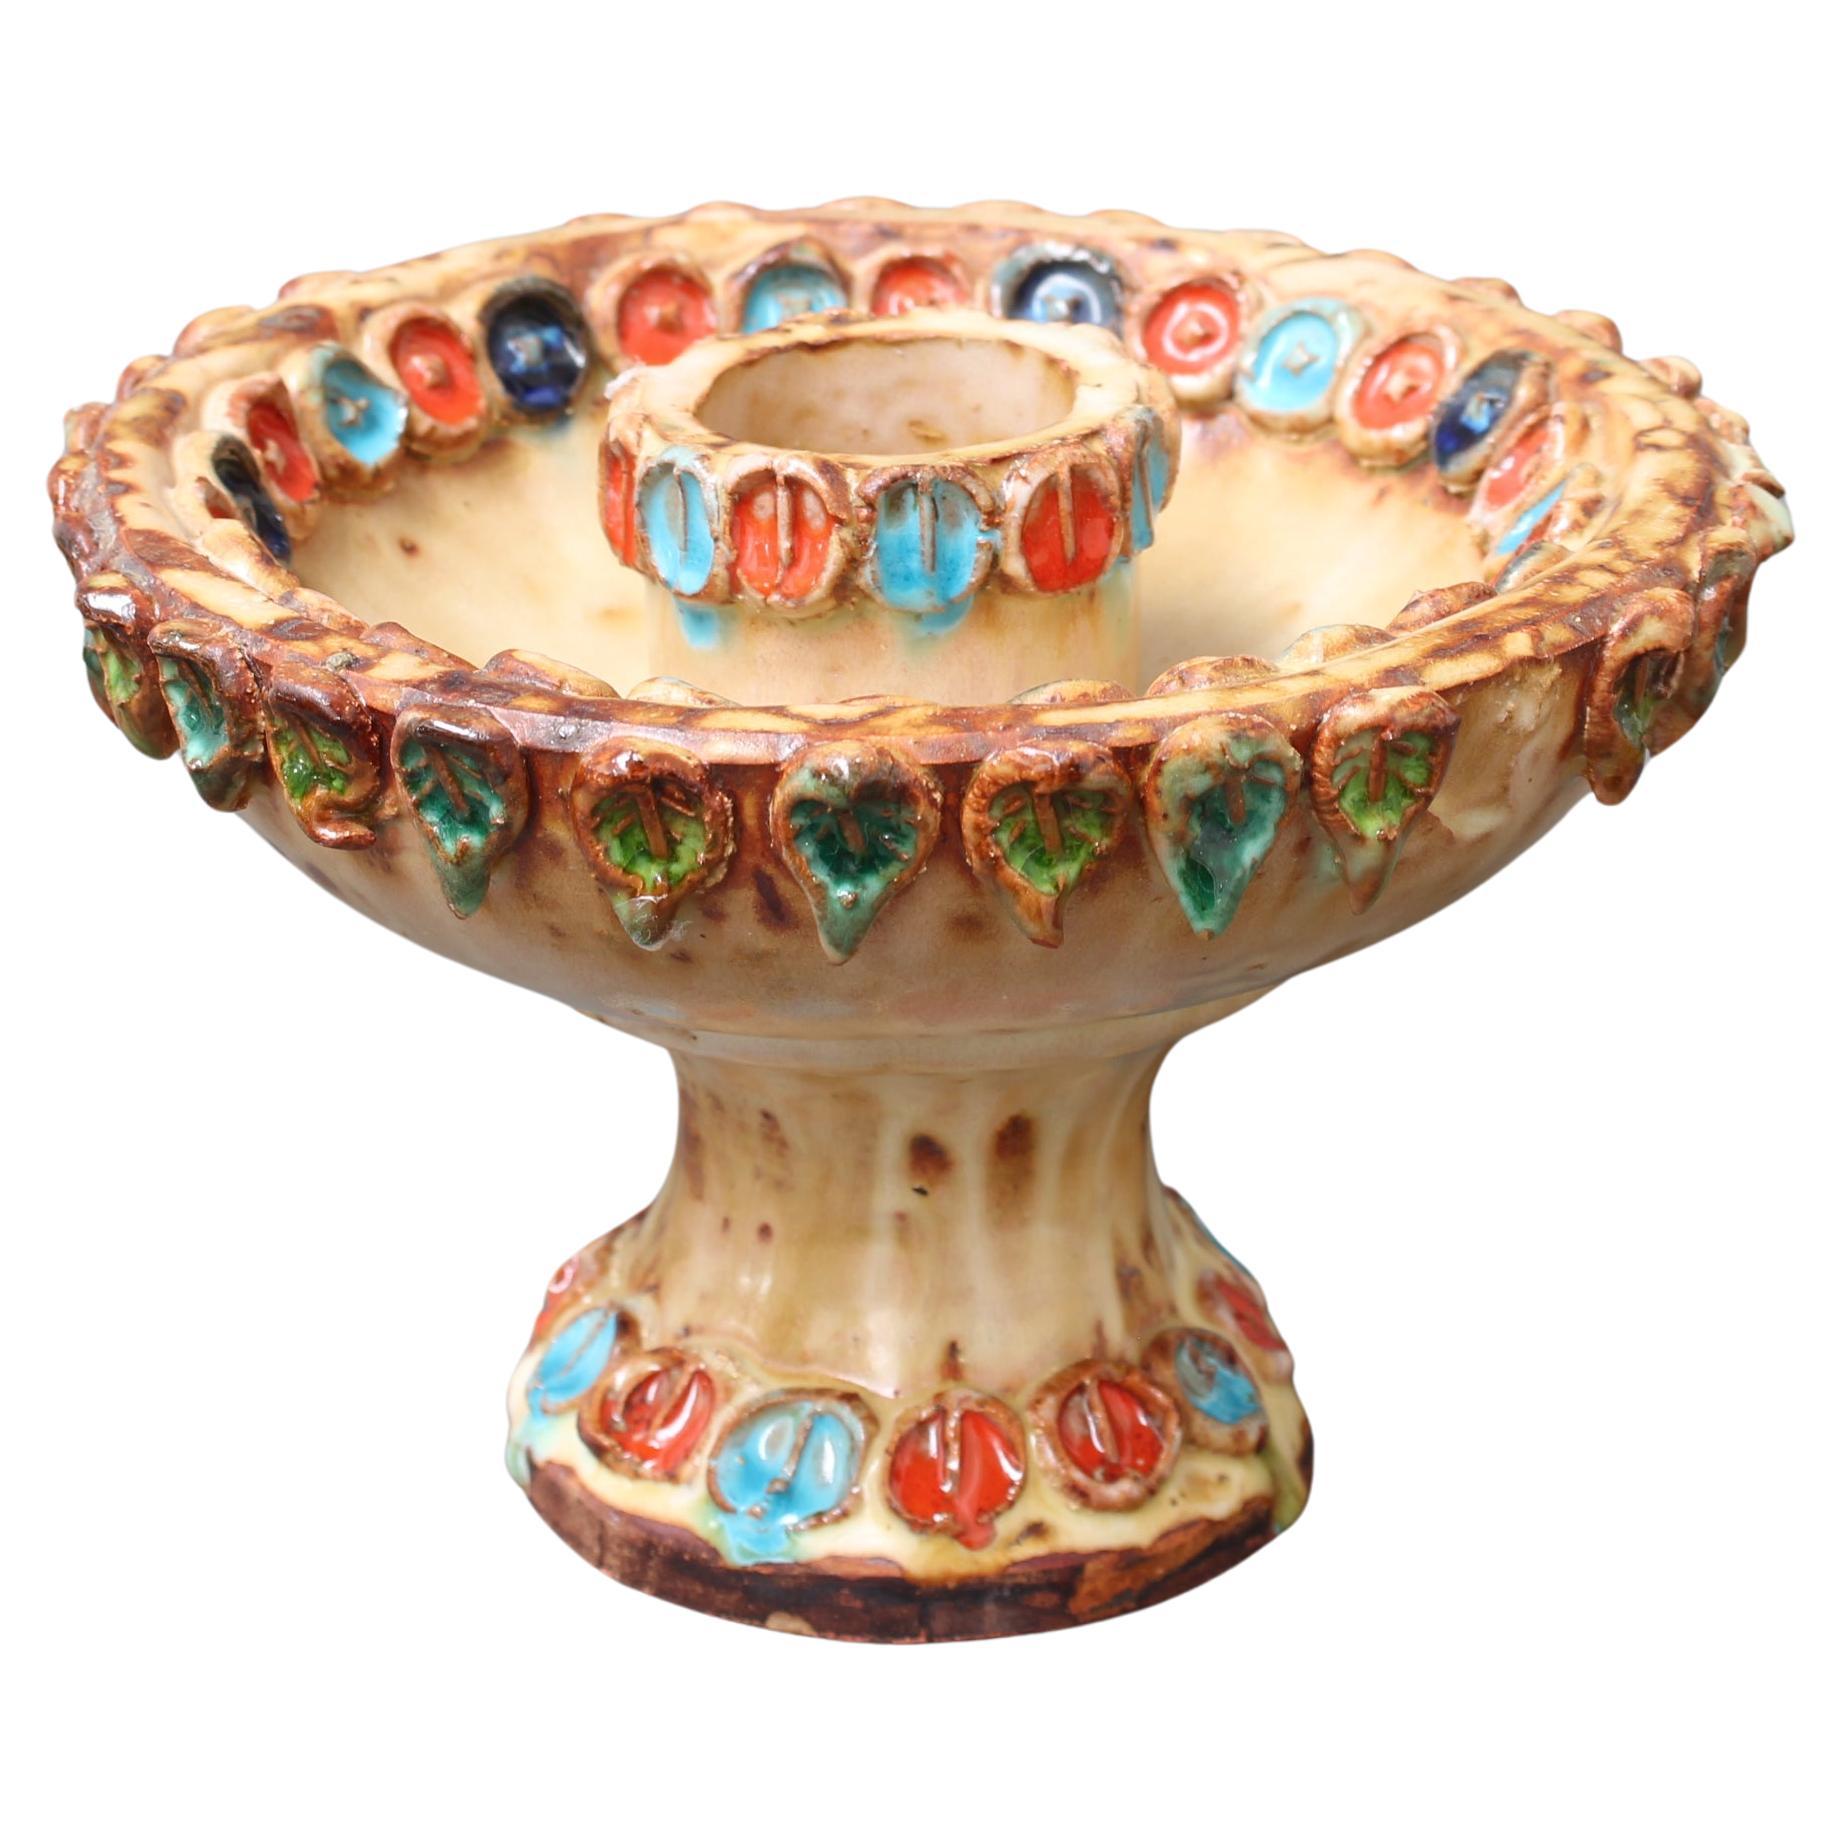 Vintage French Ceramic Candle-Holder by La Roue (circa 1960s) For Sale